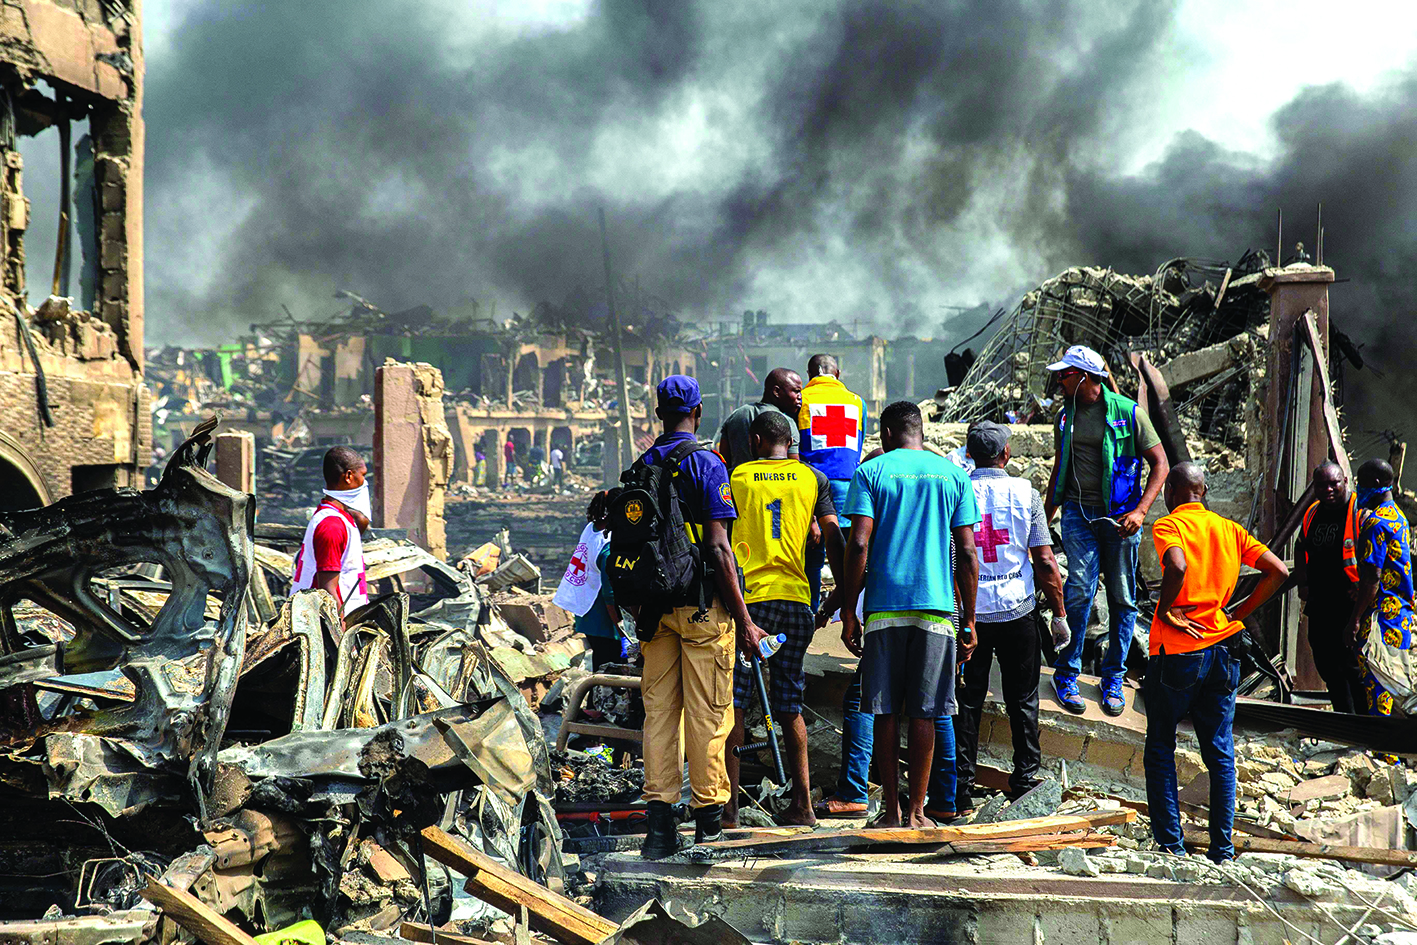 TOPSHOT - People after a gas explosion destroyed buildings and killed at least 15 people, in Nigeria's commercial capital Lagos on March 15, 2020 - A gas explosion in Nigeria's commercial capital Lagos killed at least 15 people, injured many more and destroyed around 50 buildings on March 15, 2020. (Photo by Benson IBEABUCHI / AFP)